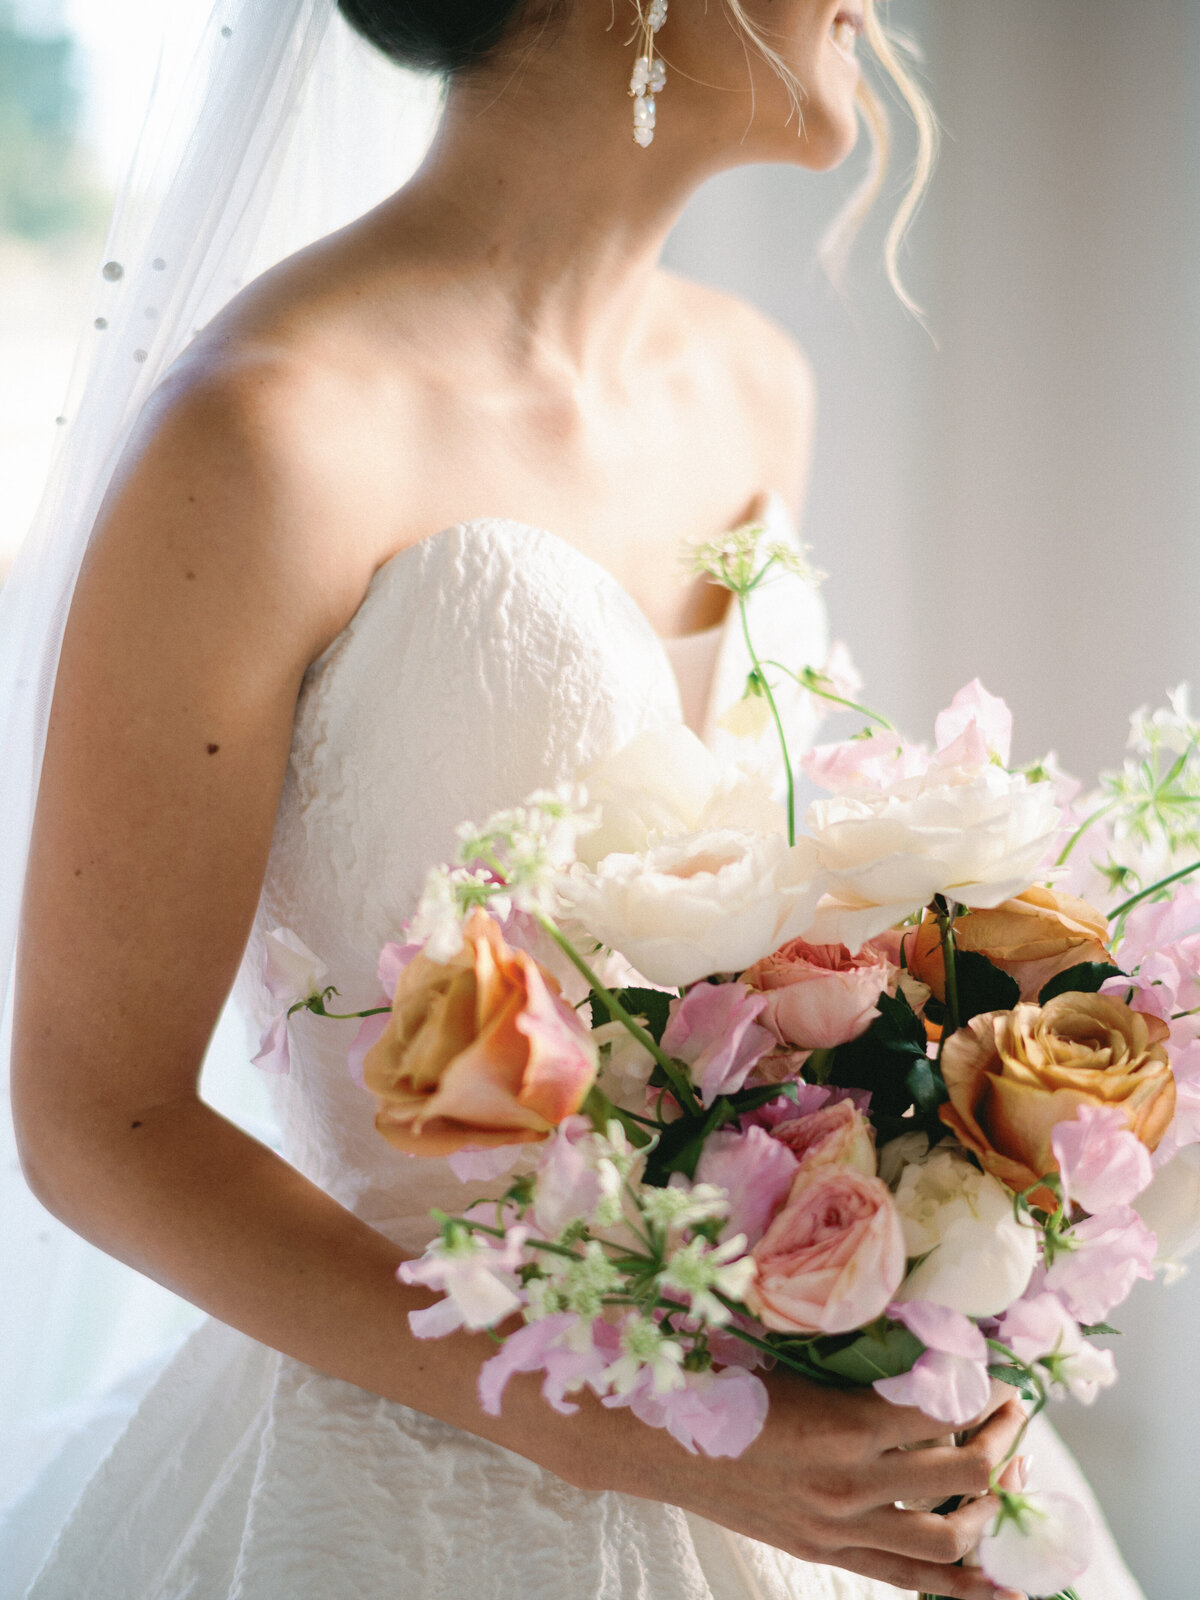 Bridal bouquet with pink, orange, and white flowers